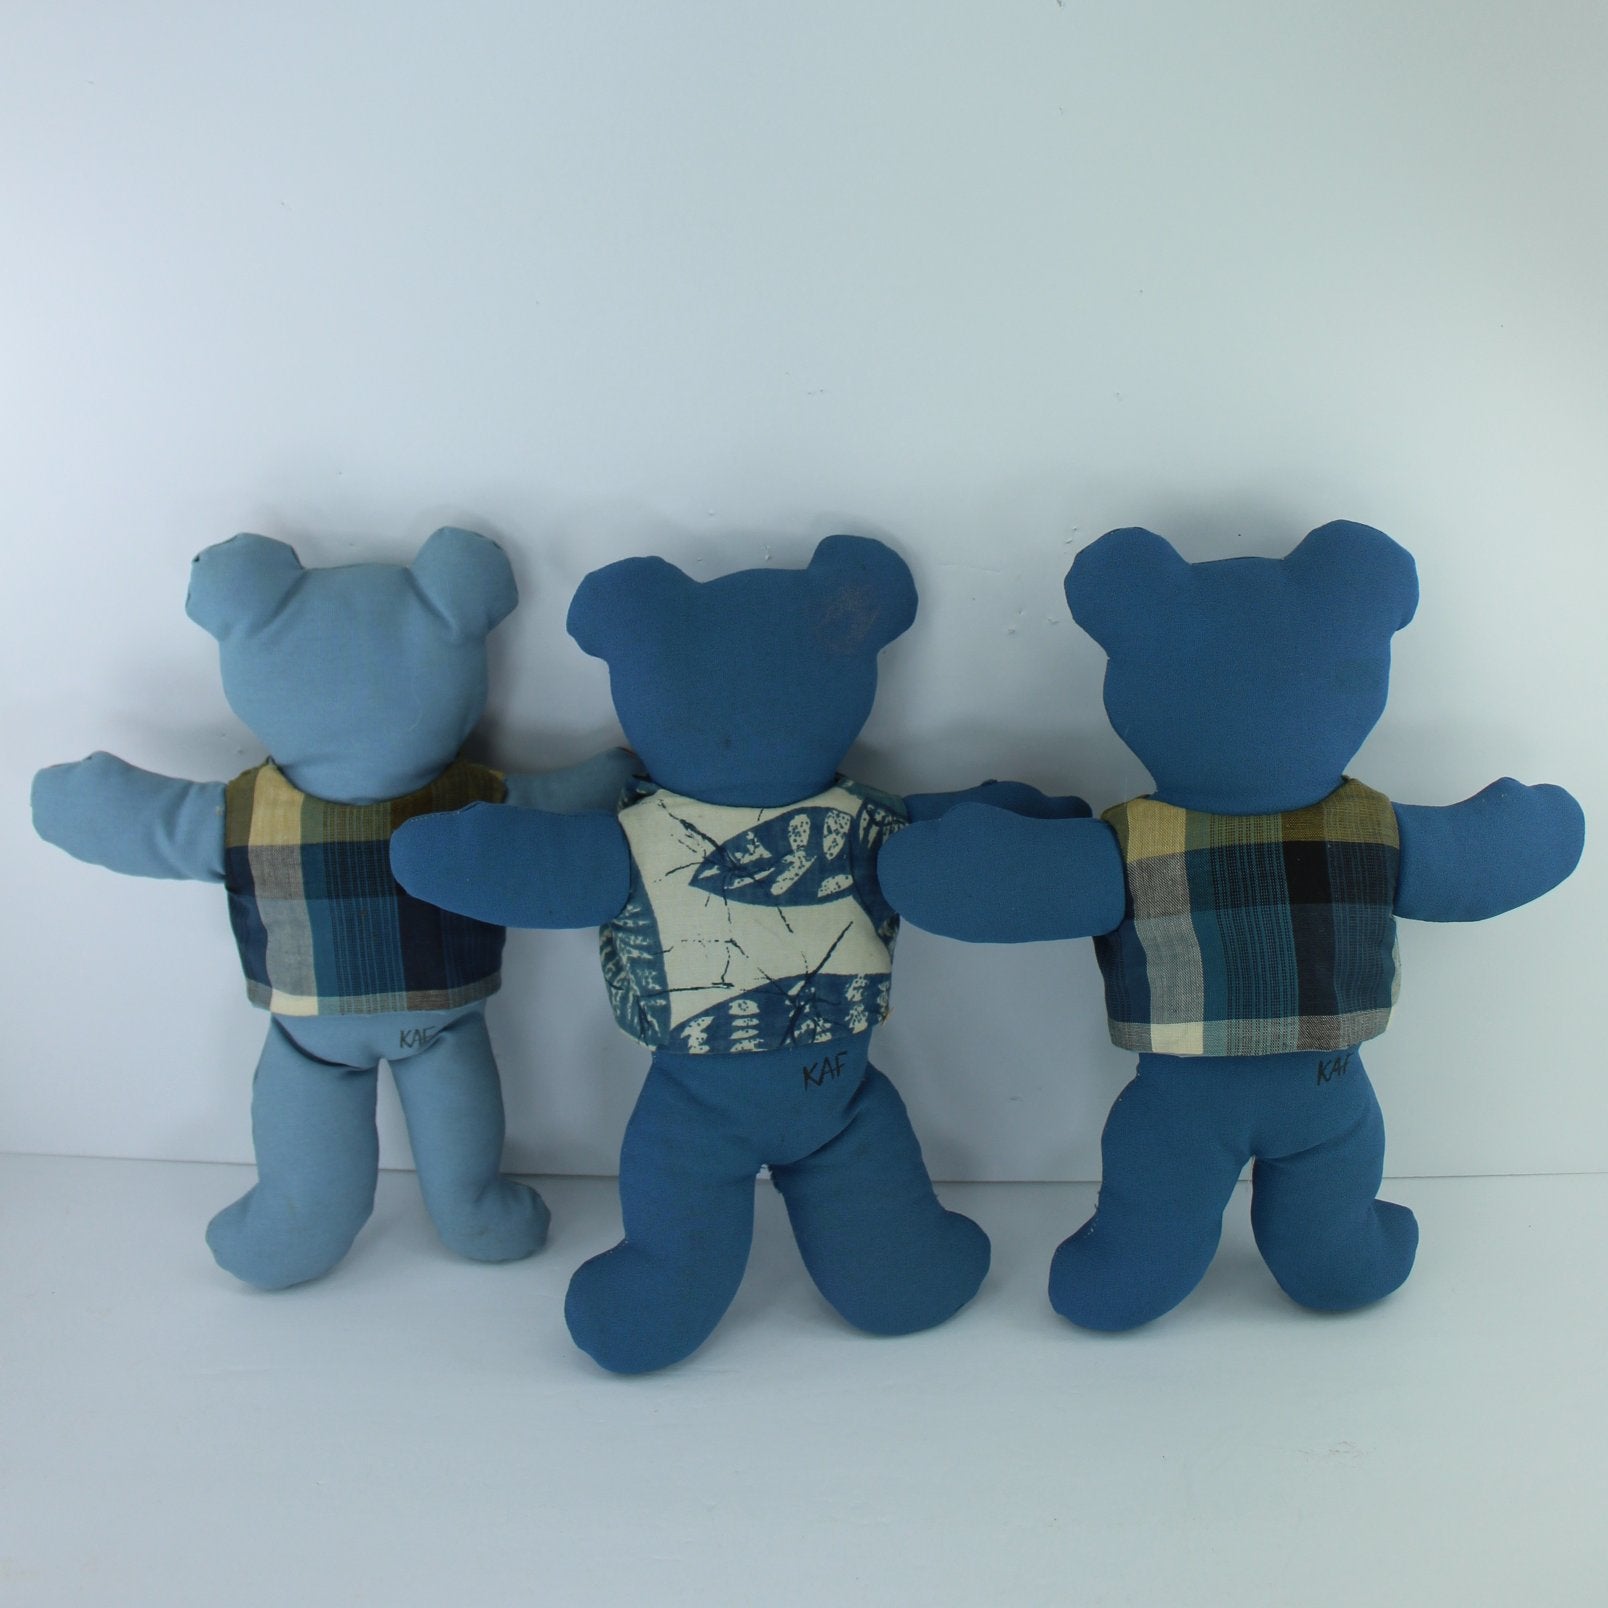 Hand Crafted 3 Teddy Bears With 18 Bear Vests DIY Charity Project New Business reverse view teddy bears